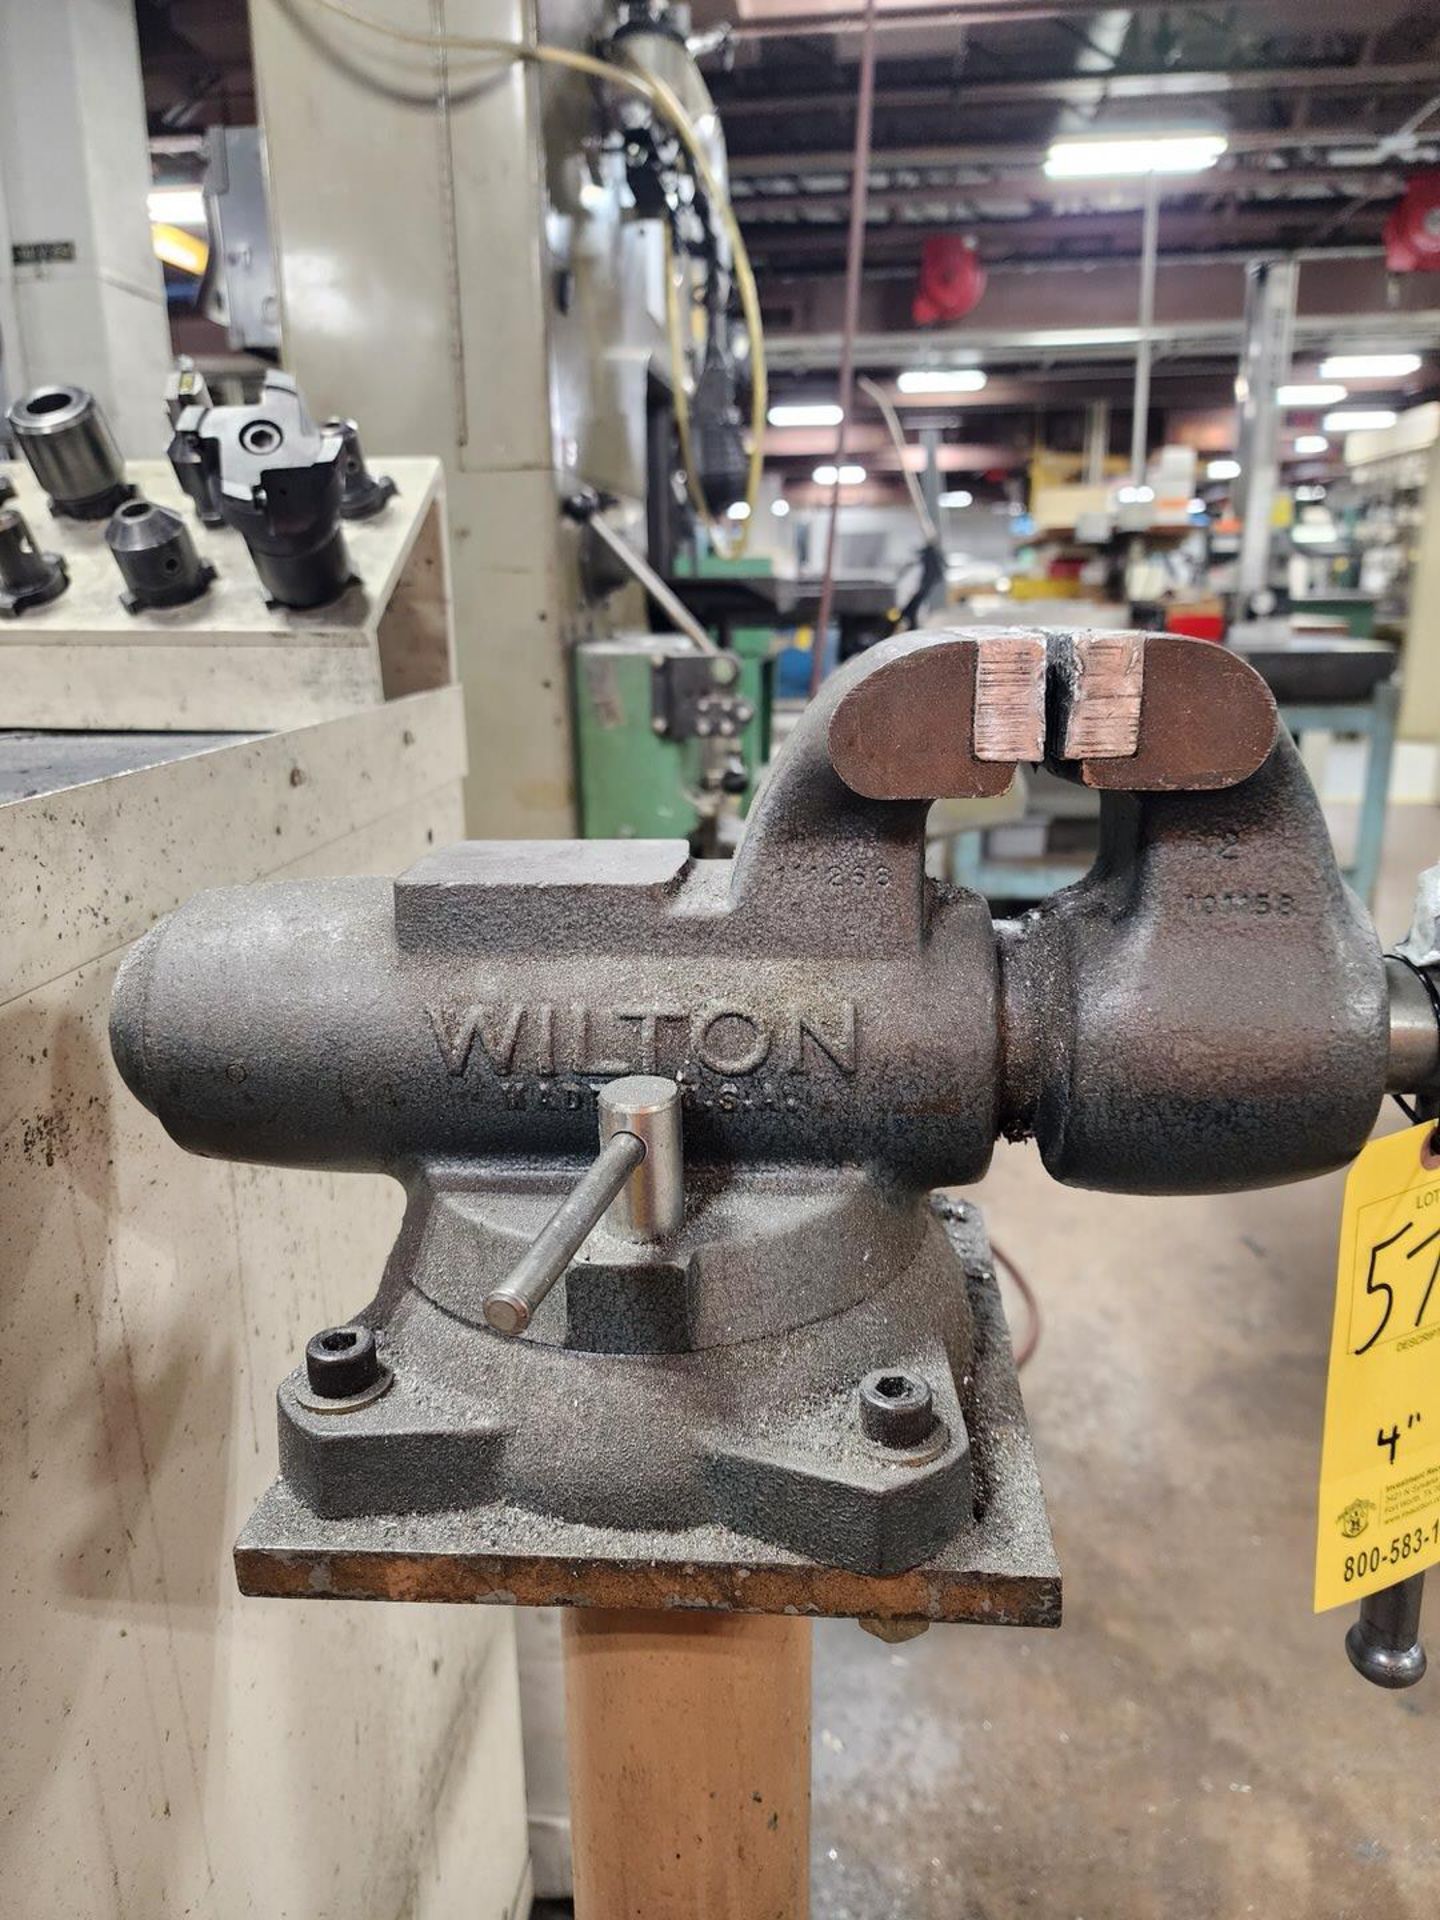 Wilton 4" Vise W/ Stand - Image 2 of 3